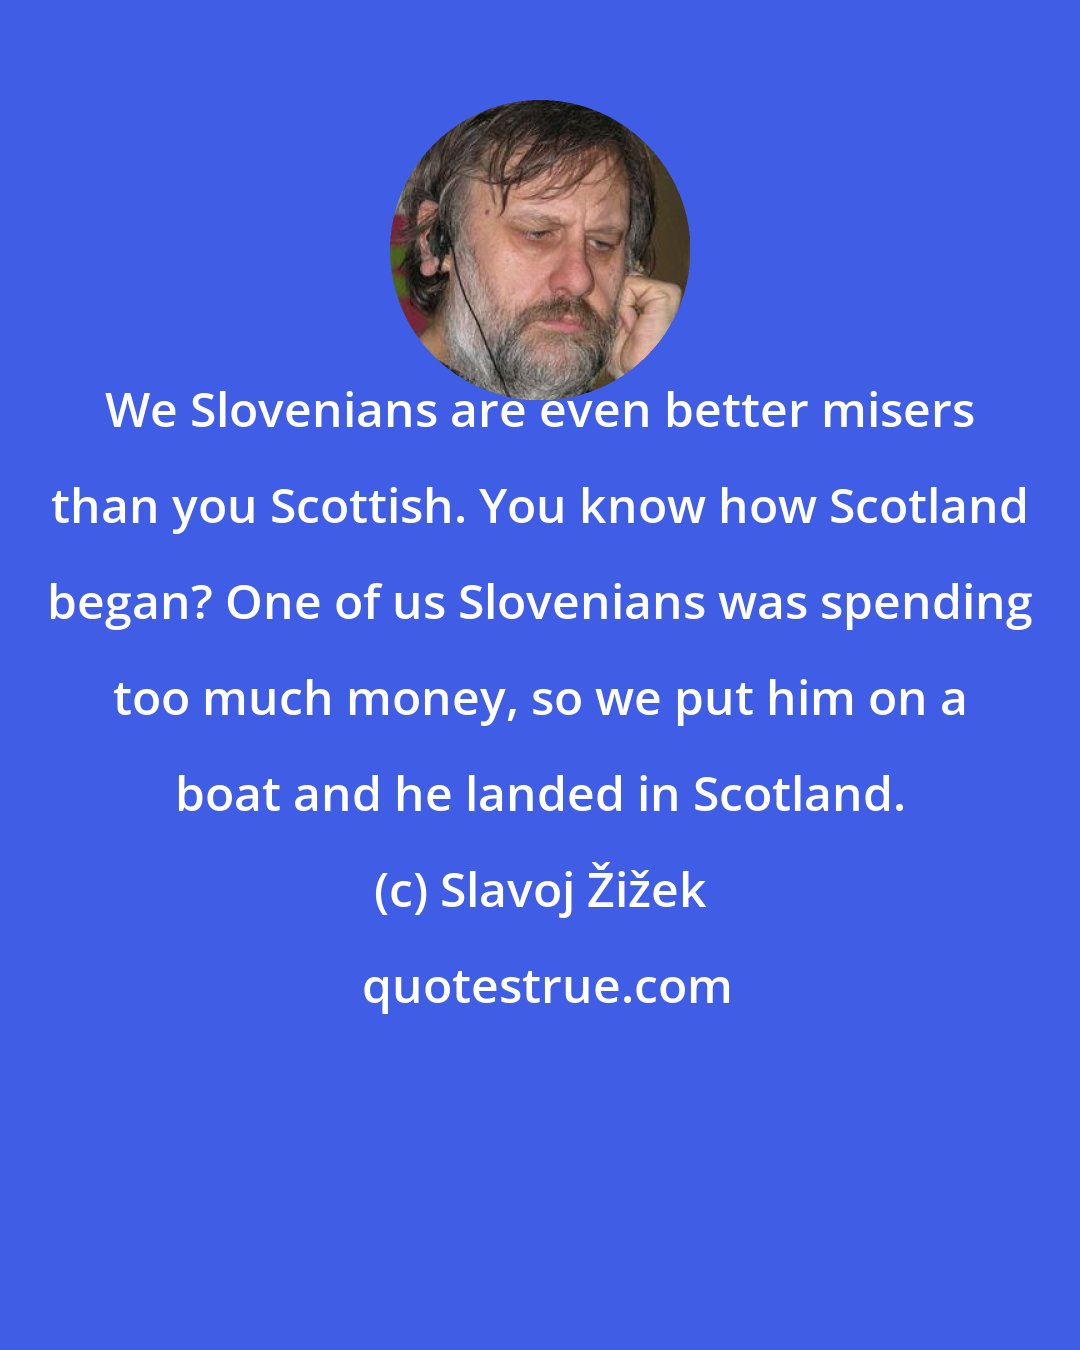 Slavoj Žižek: We Slovenians are even better misers than you Scottish. You know how Scotland began? One of us Slovenians was spending too much money, so we put him on a boat and he landed in Scotland.